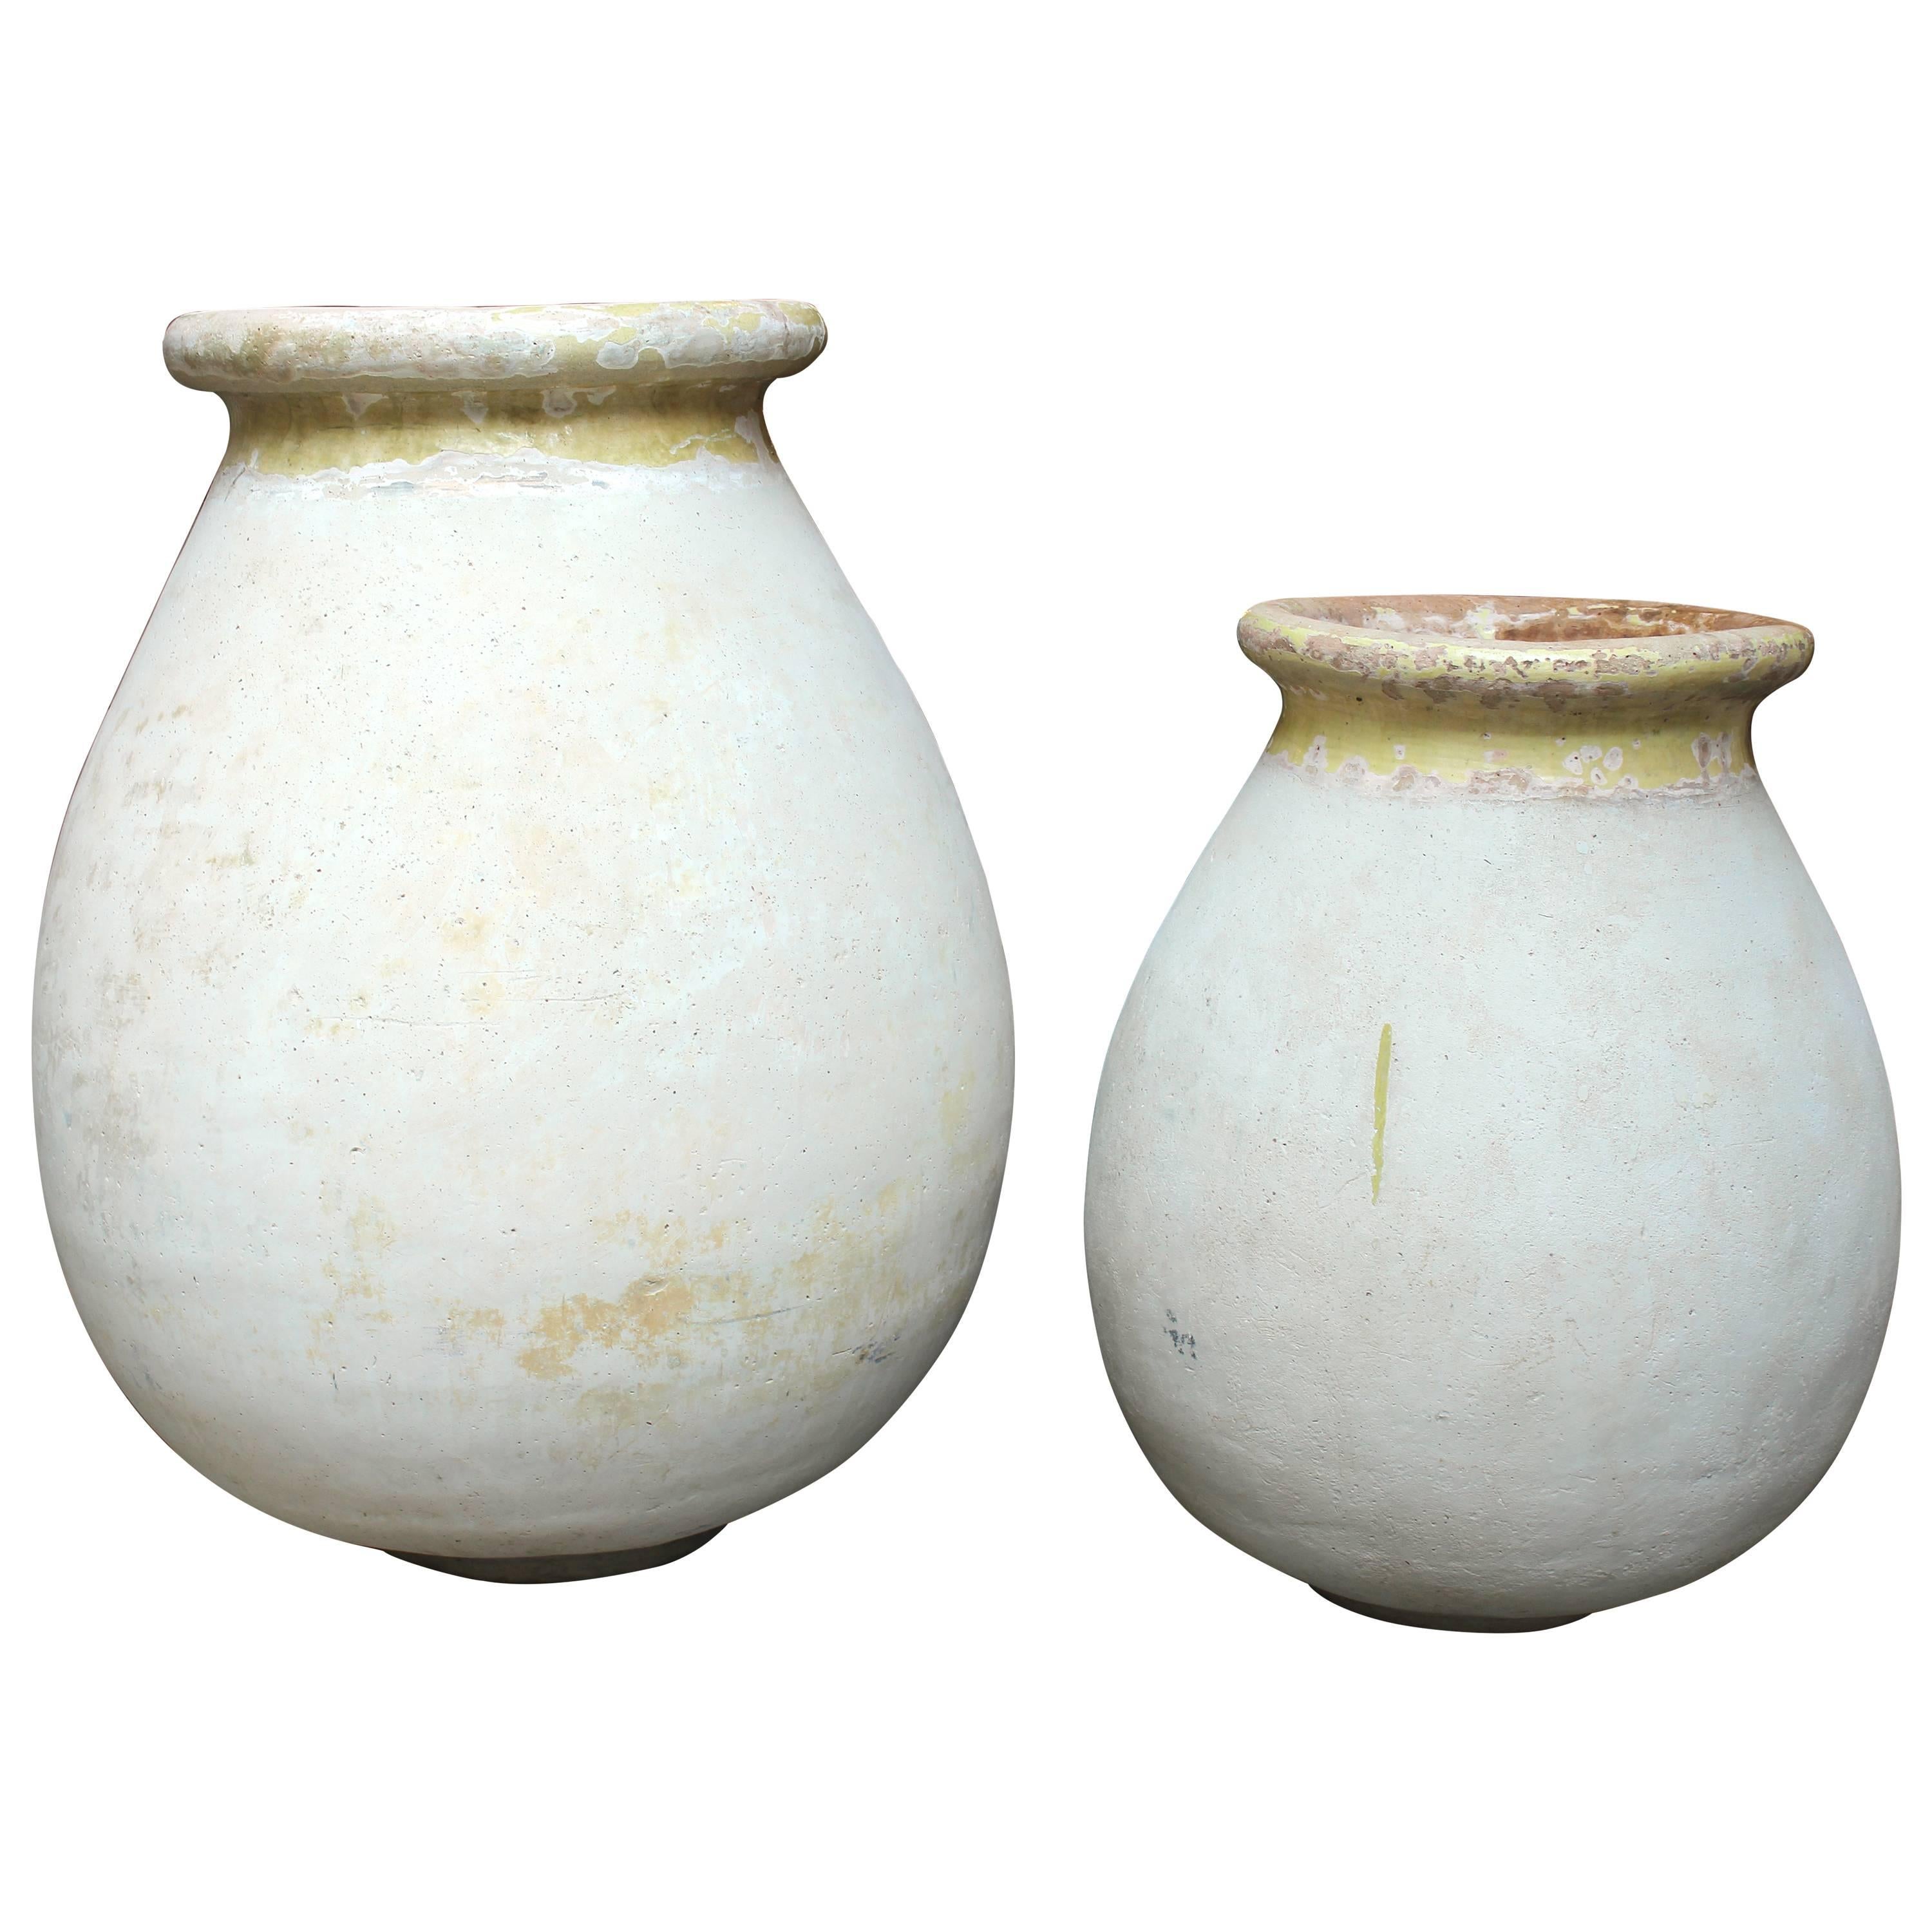 Grouping of Two French "Dans Le Maison" Olive Jars, circa 1800